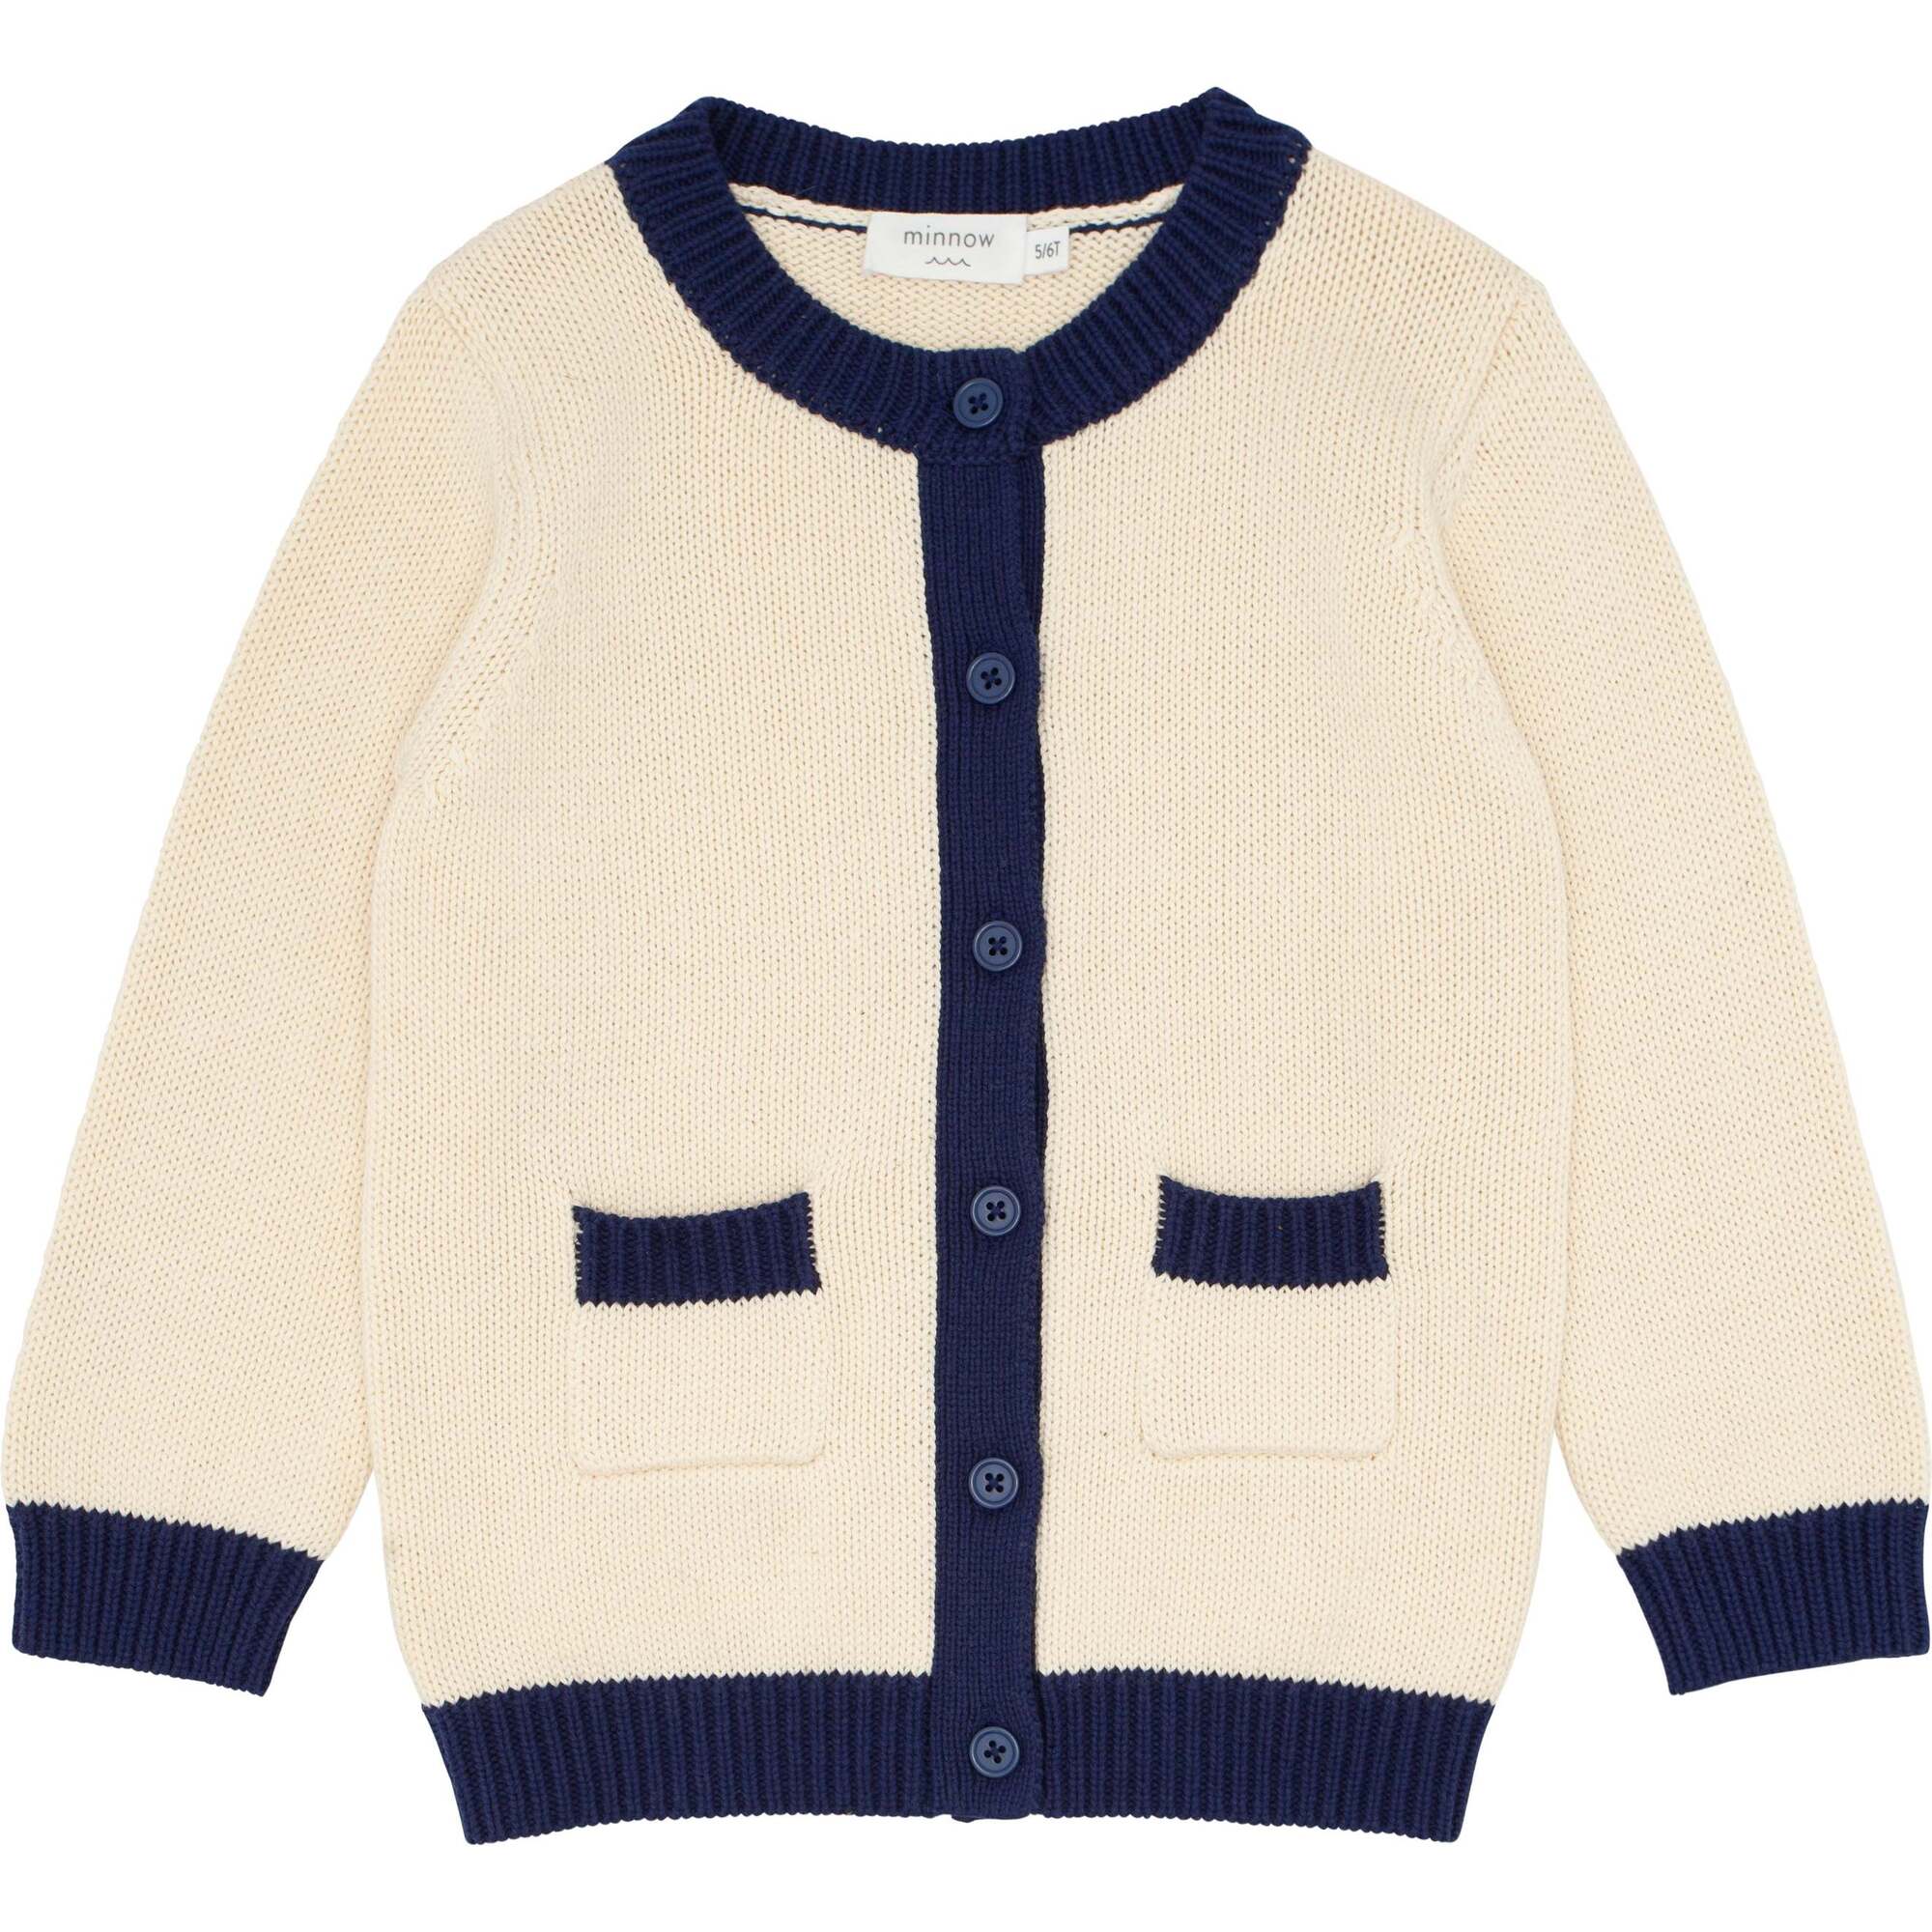 A Little Too Much Knit Cardigan Cream/Navy